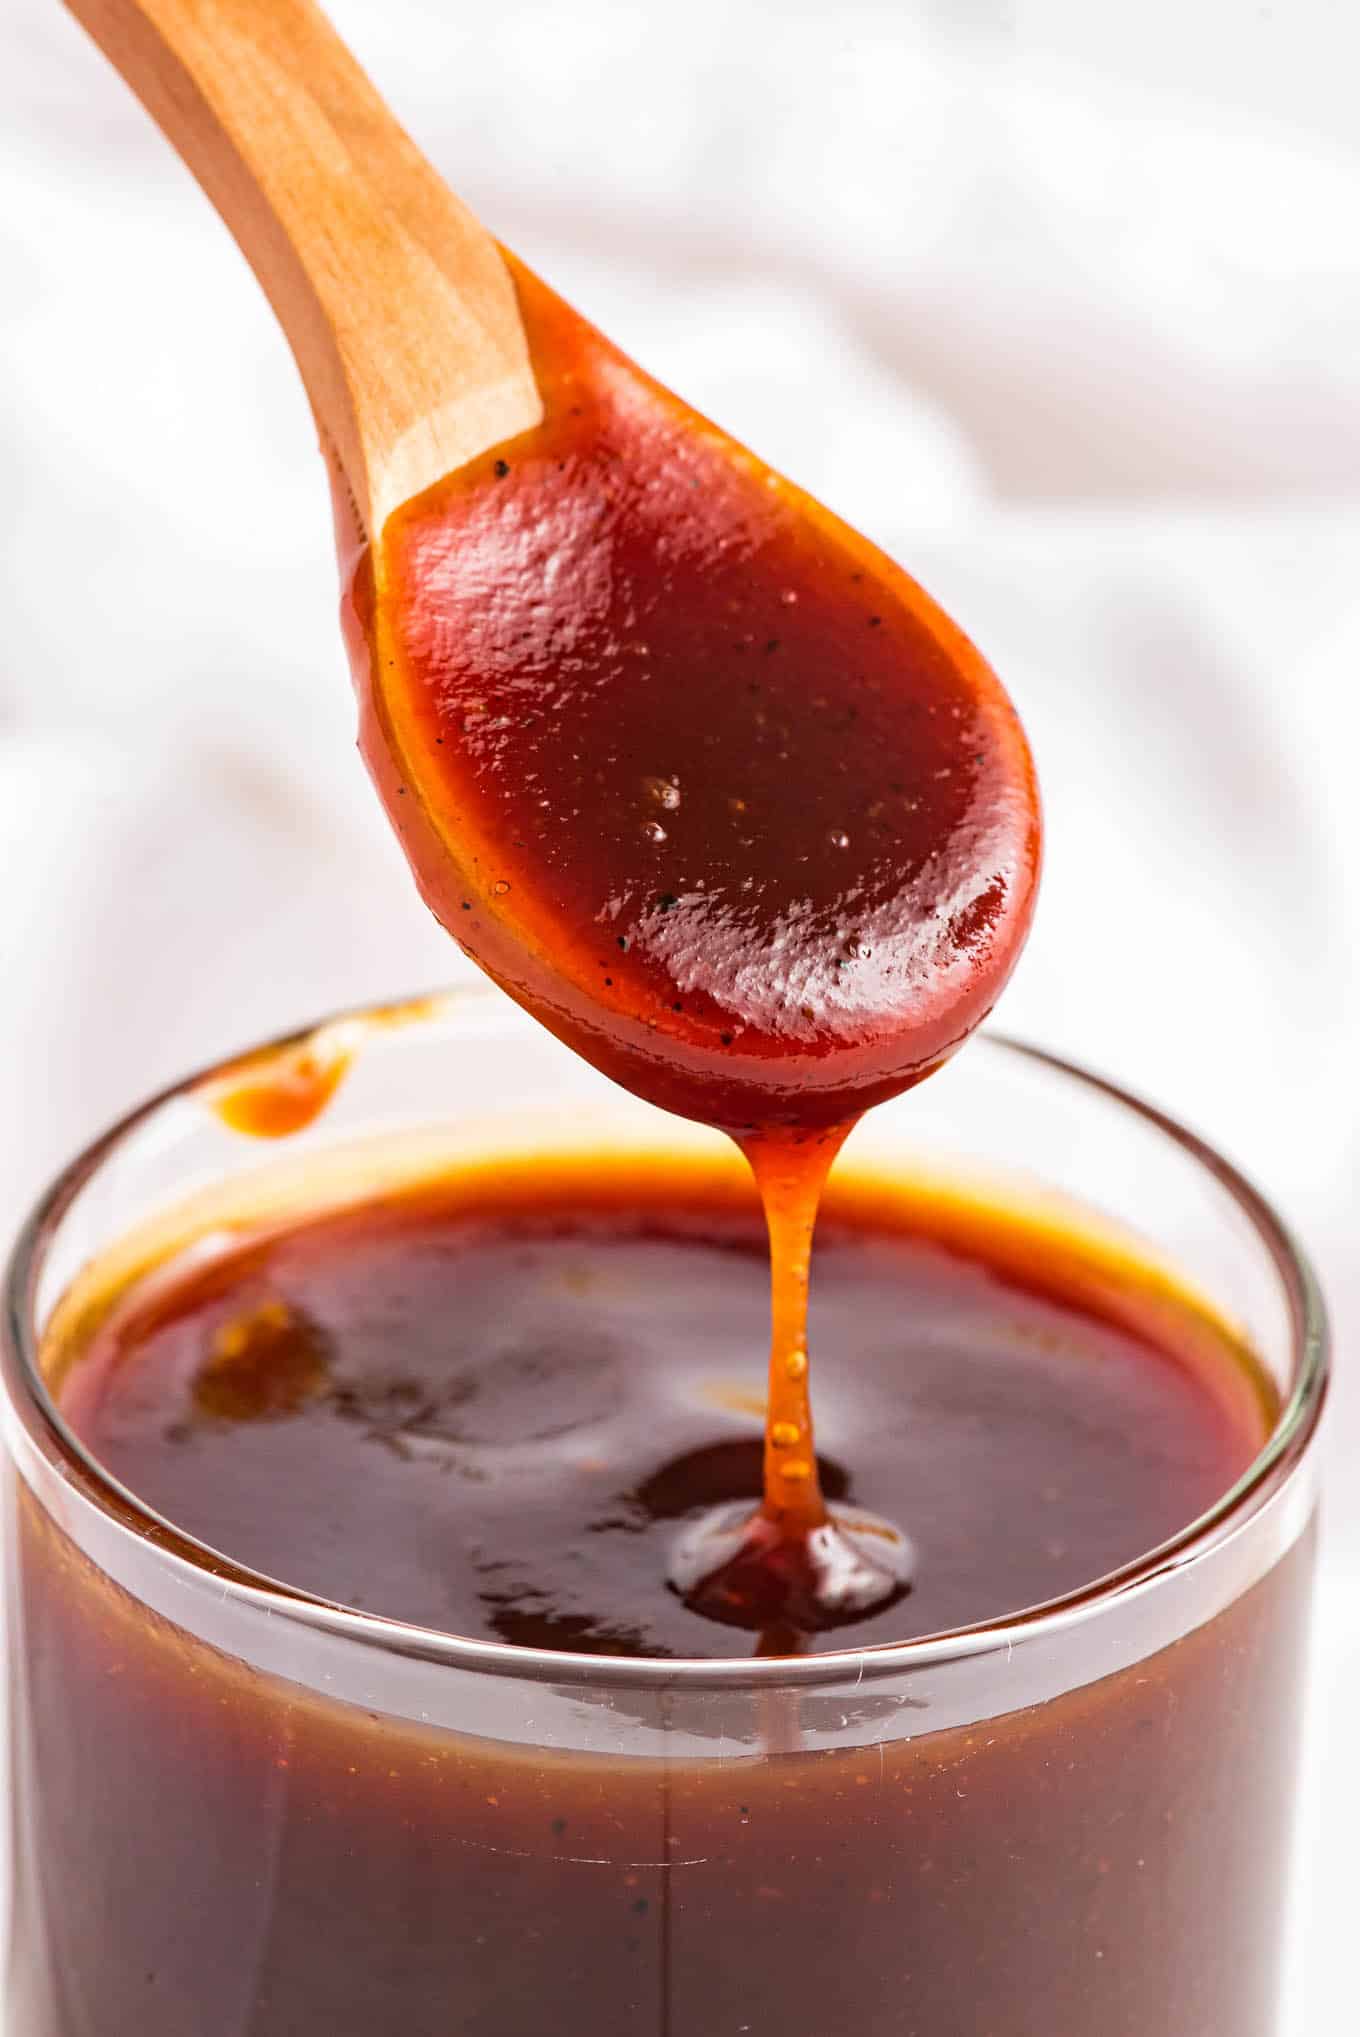 A spoonful of BBQ sauce dripping back into the jar of sauce.